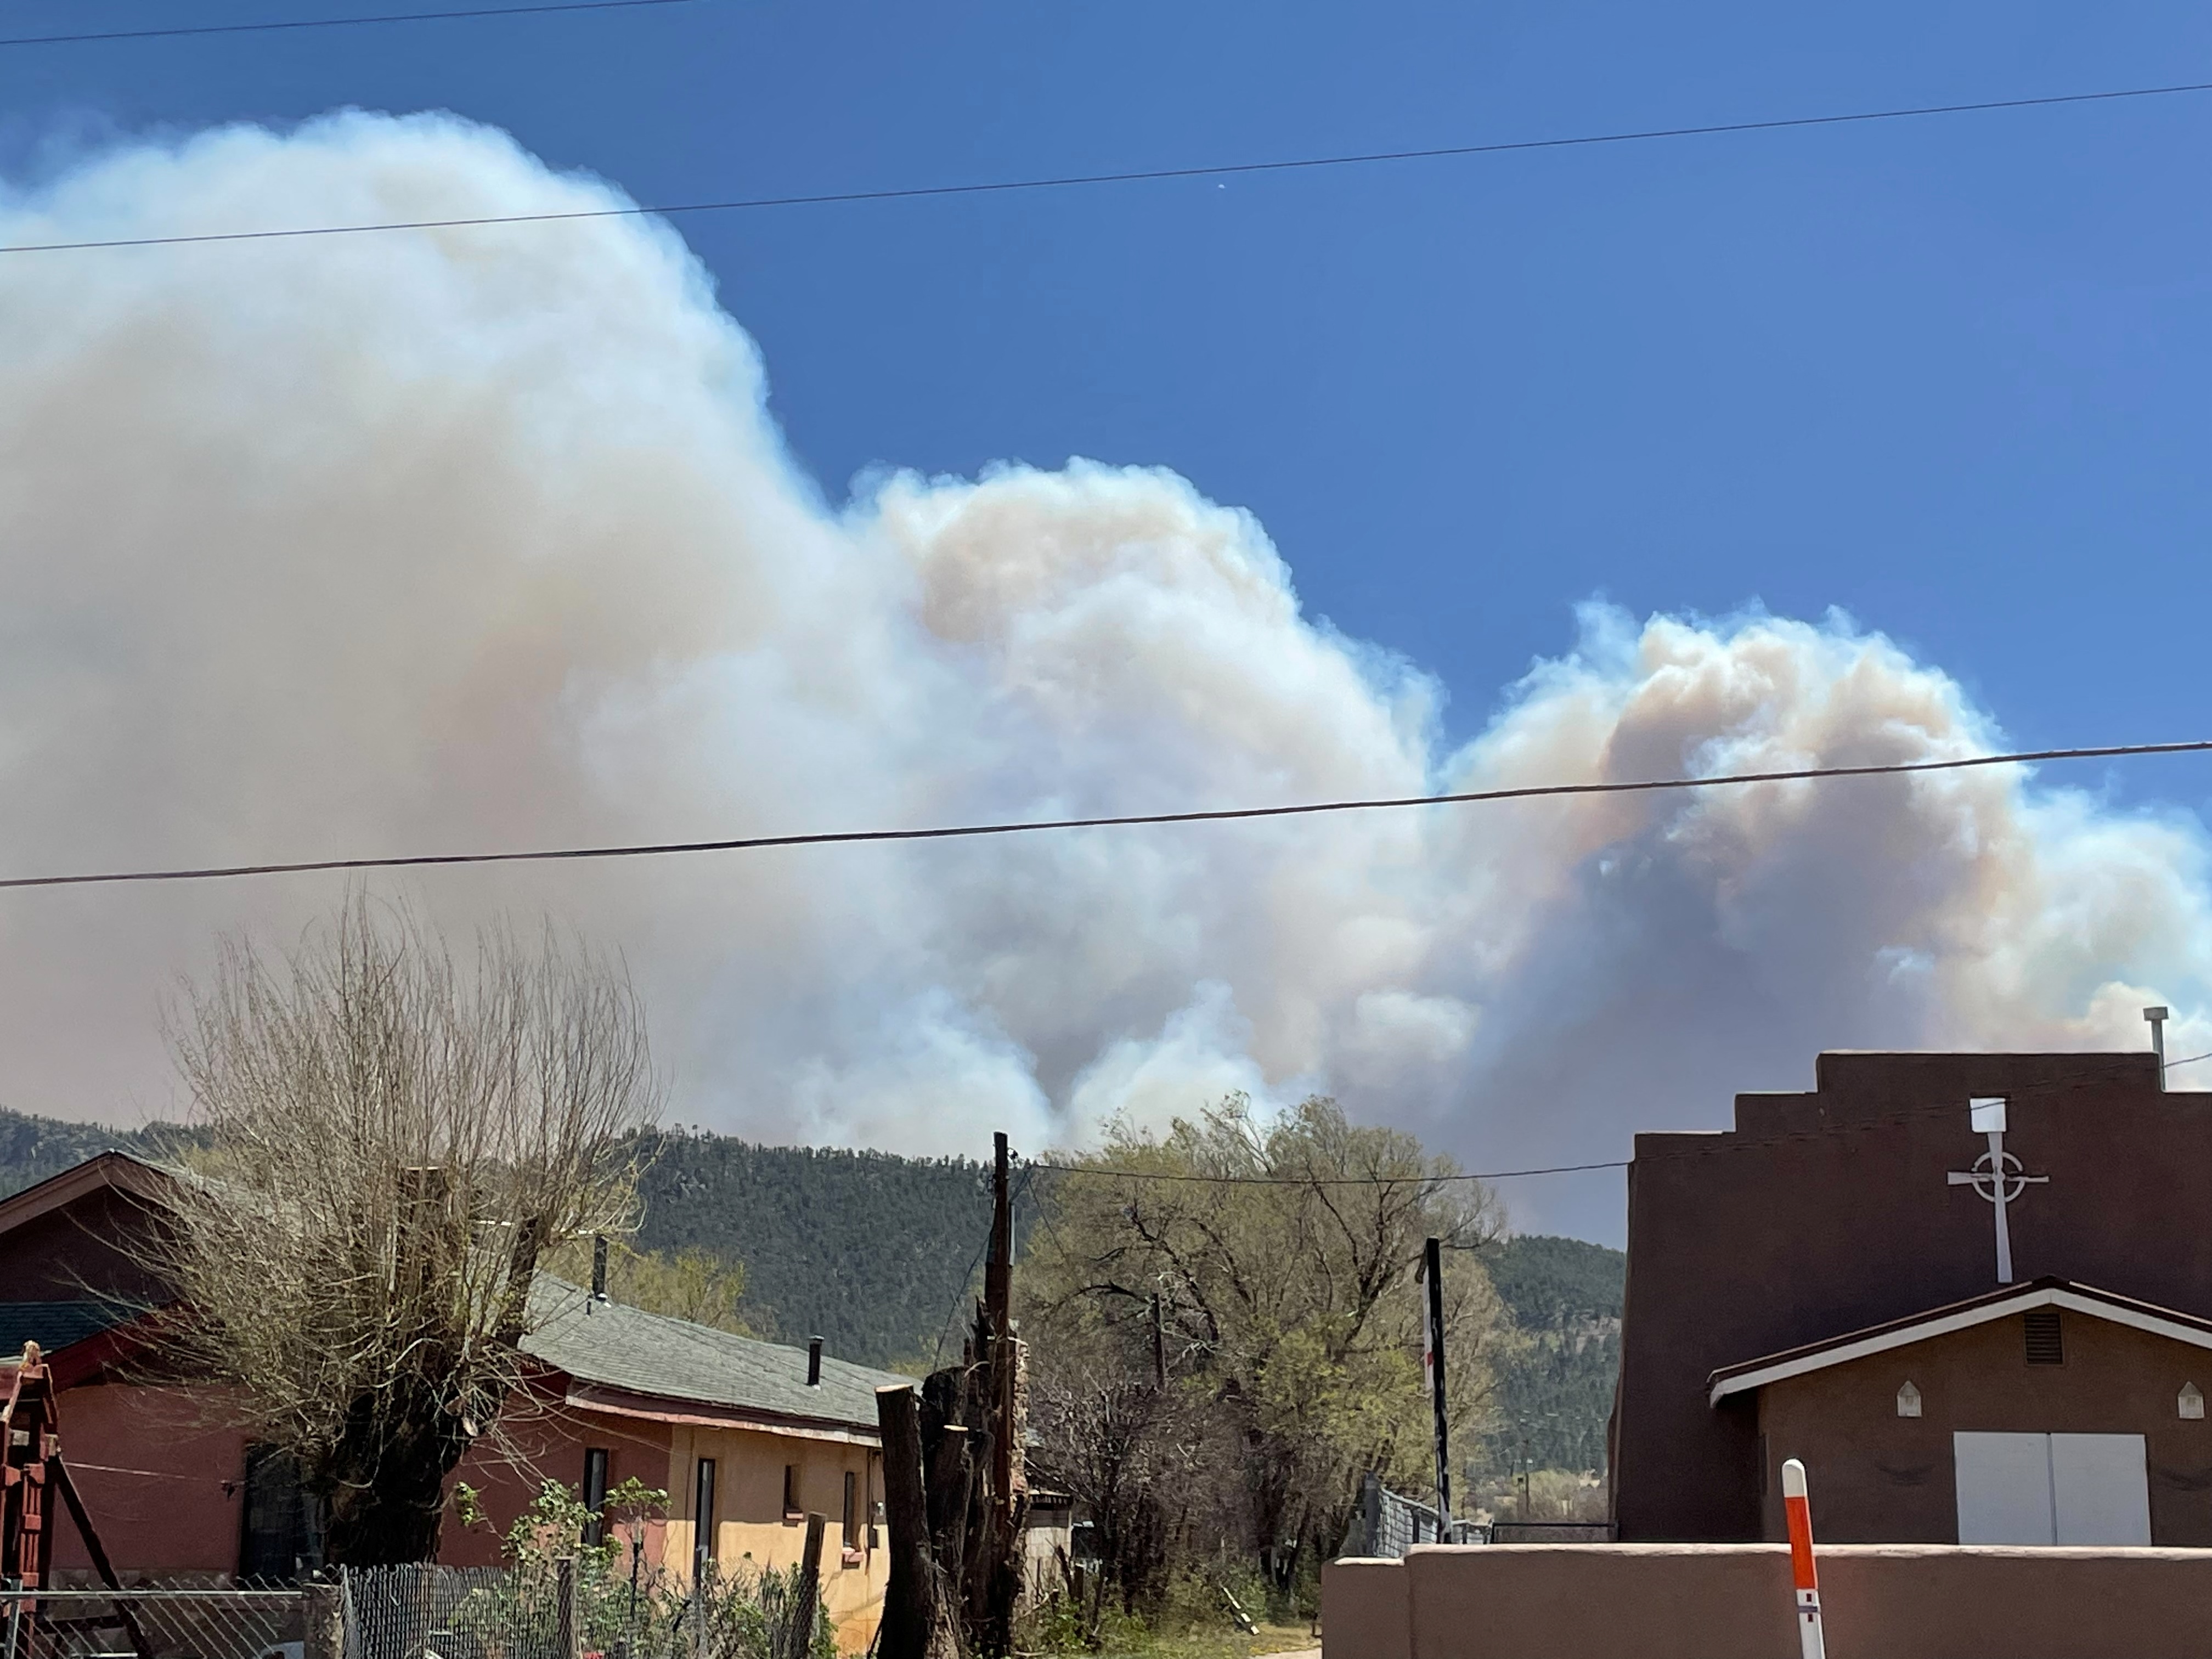 New Mexico battles "epic" wildfire